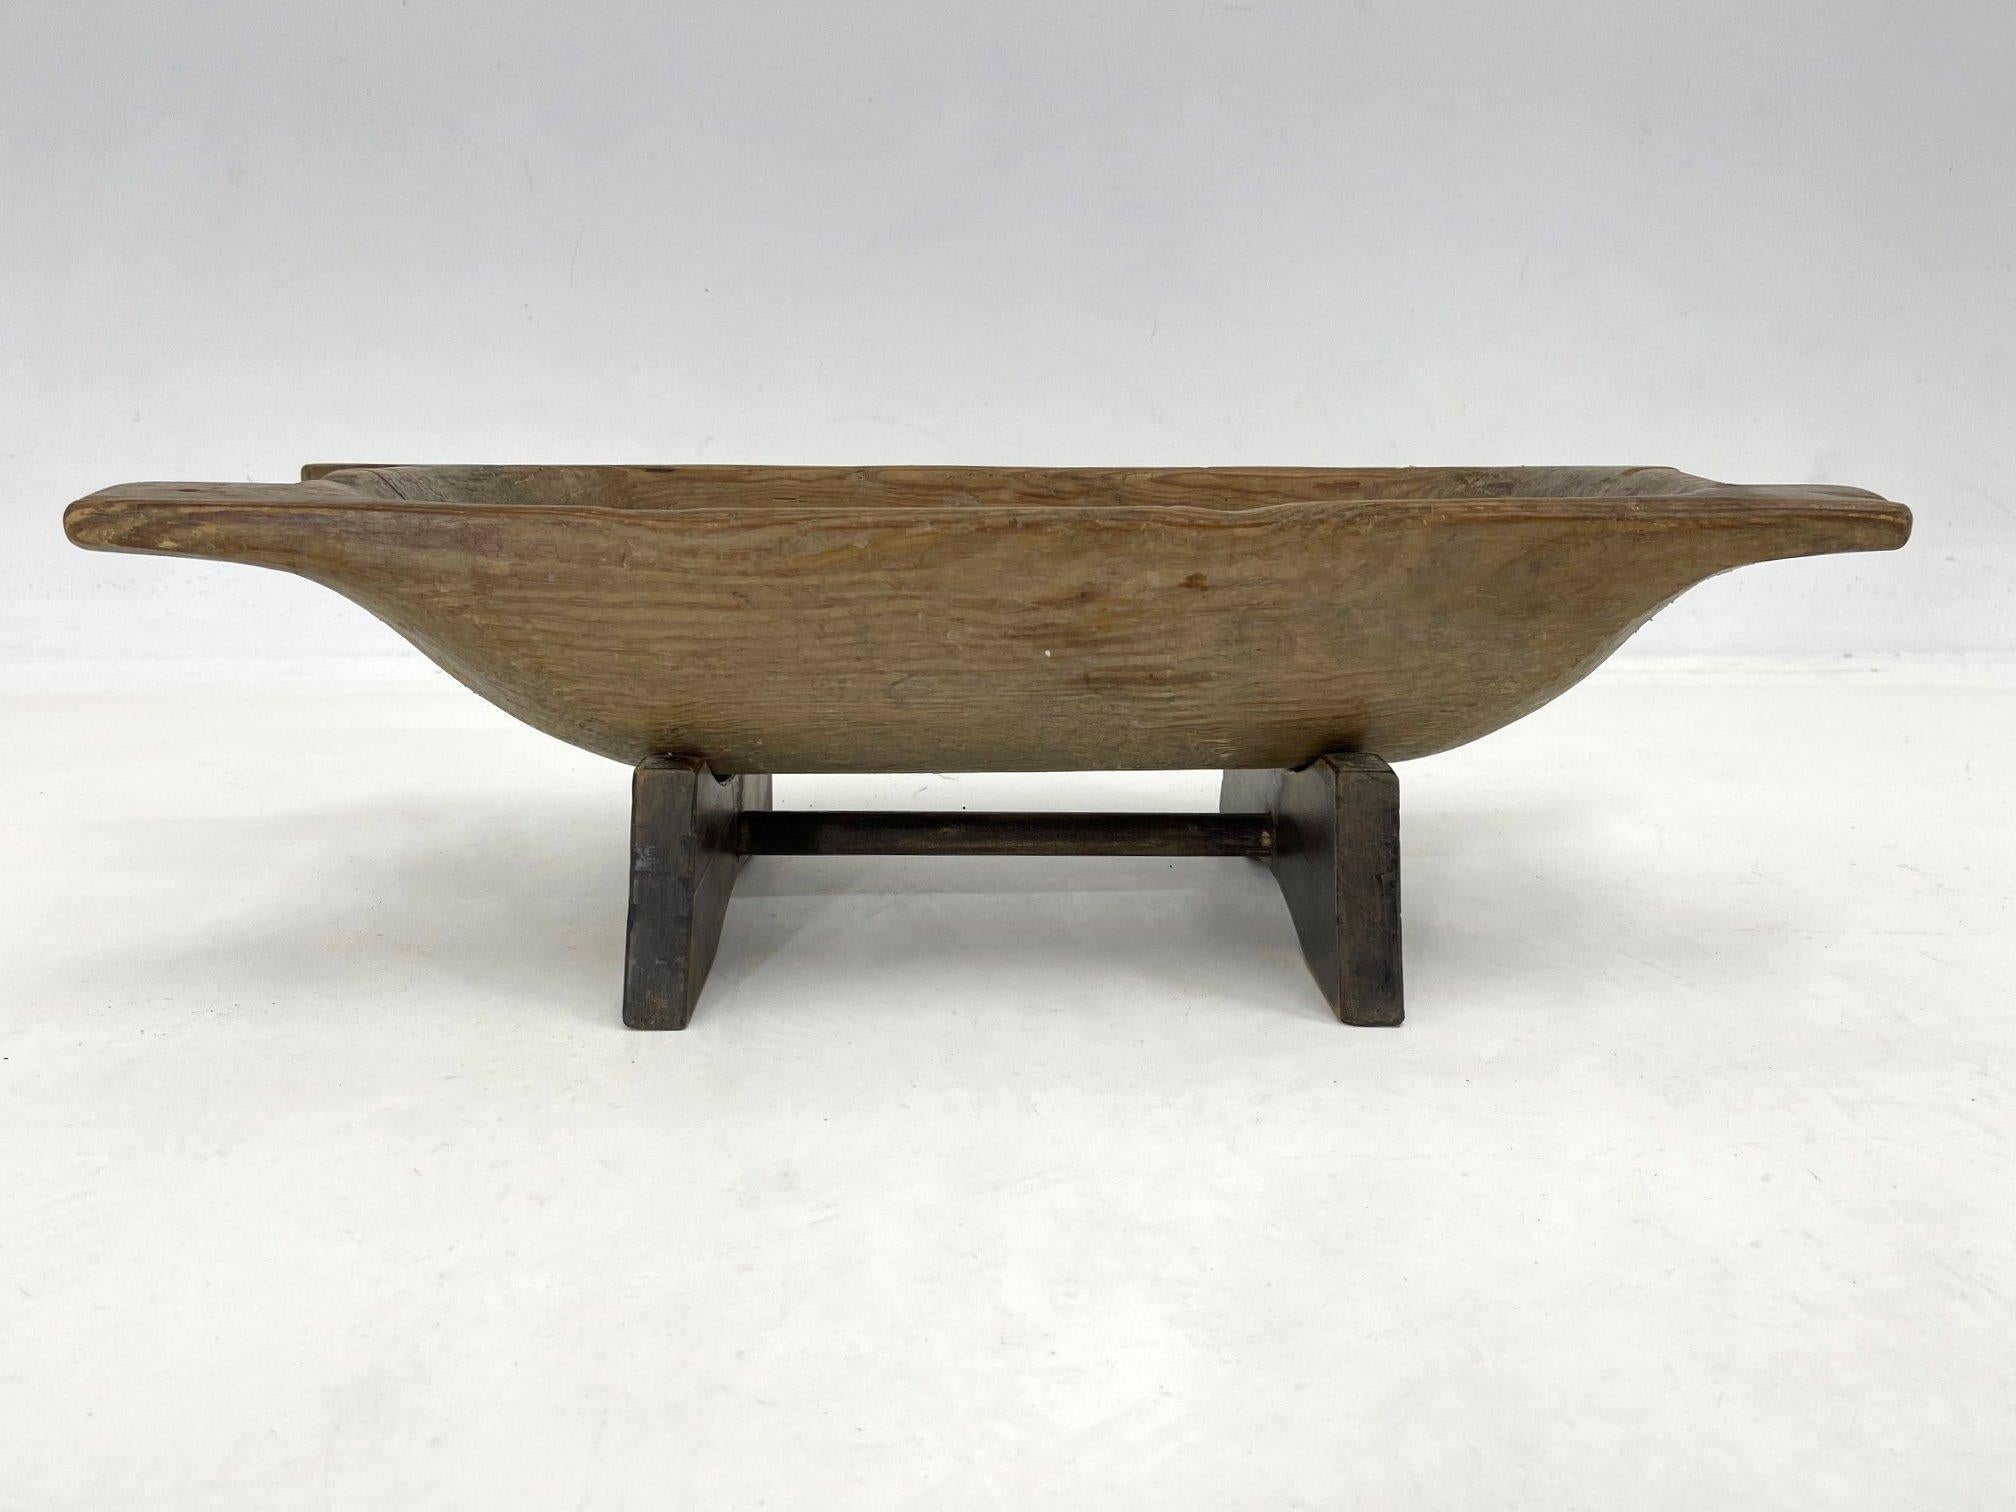 Antique wooden dough trough on original stand in unrestored, untreated original condition. A beautiful home decoration that can be used in many different ways. The height without the stand is 13 cm.